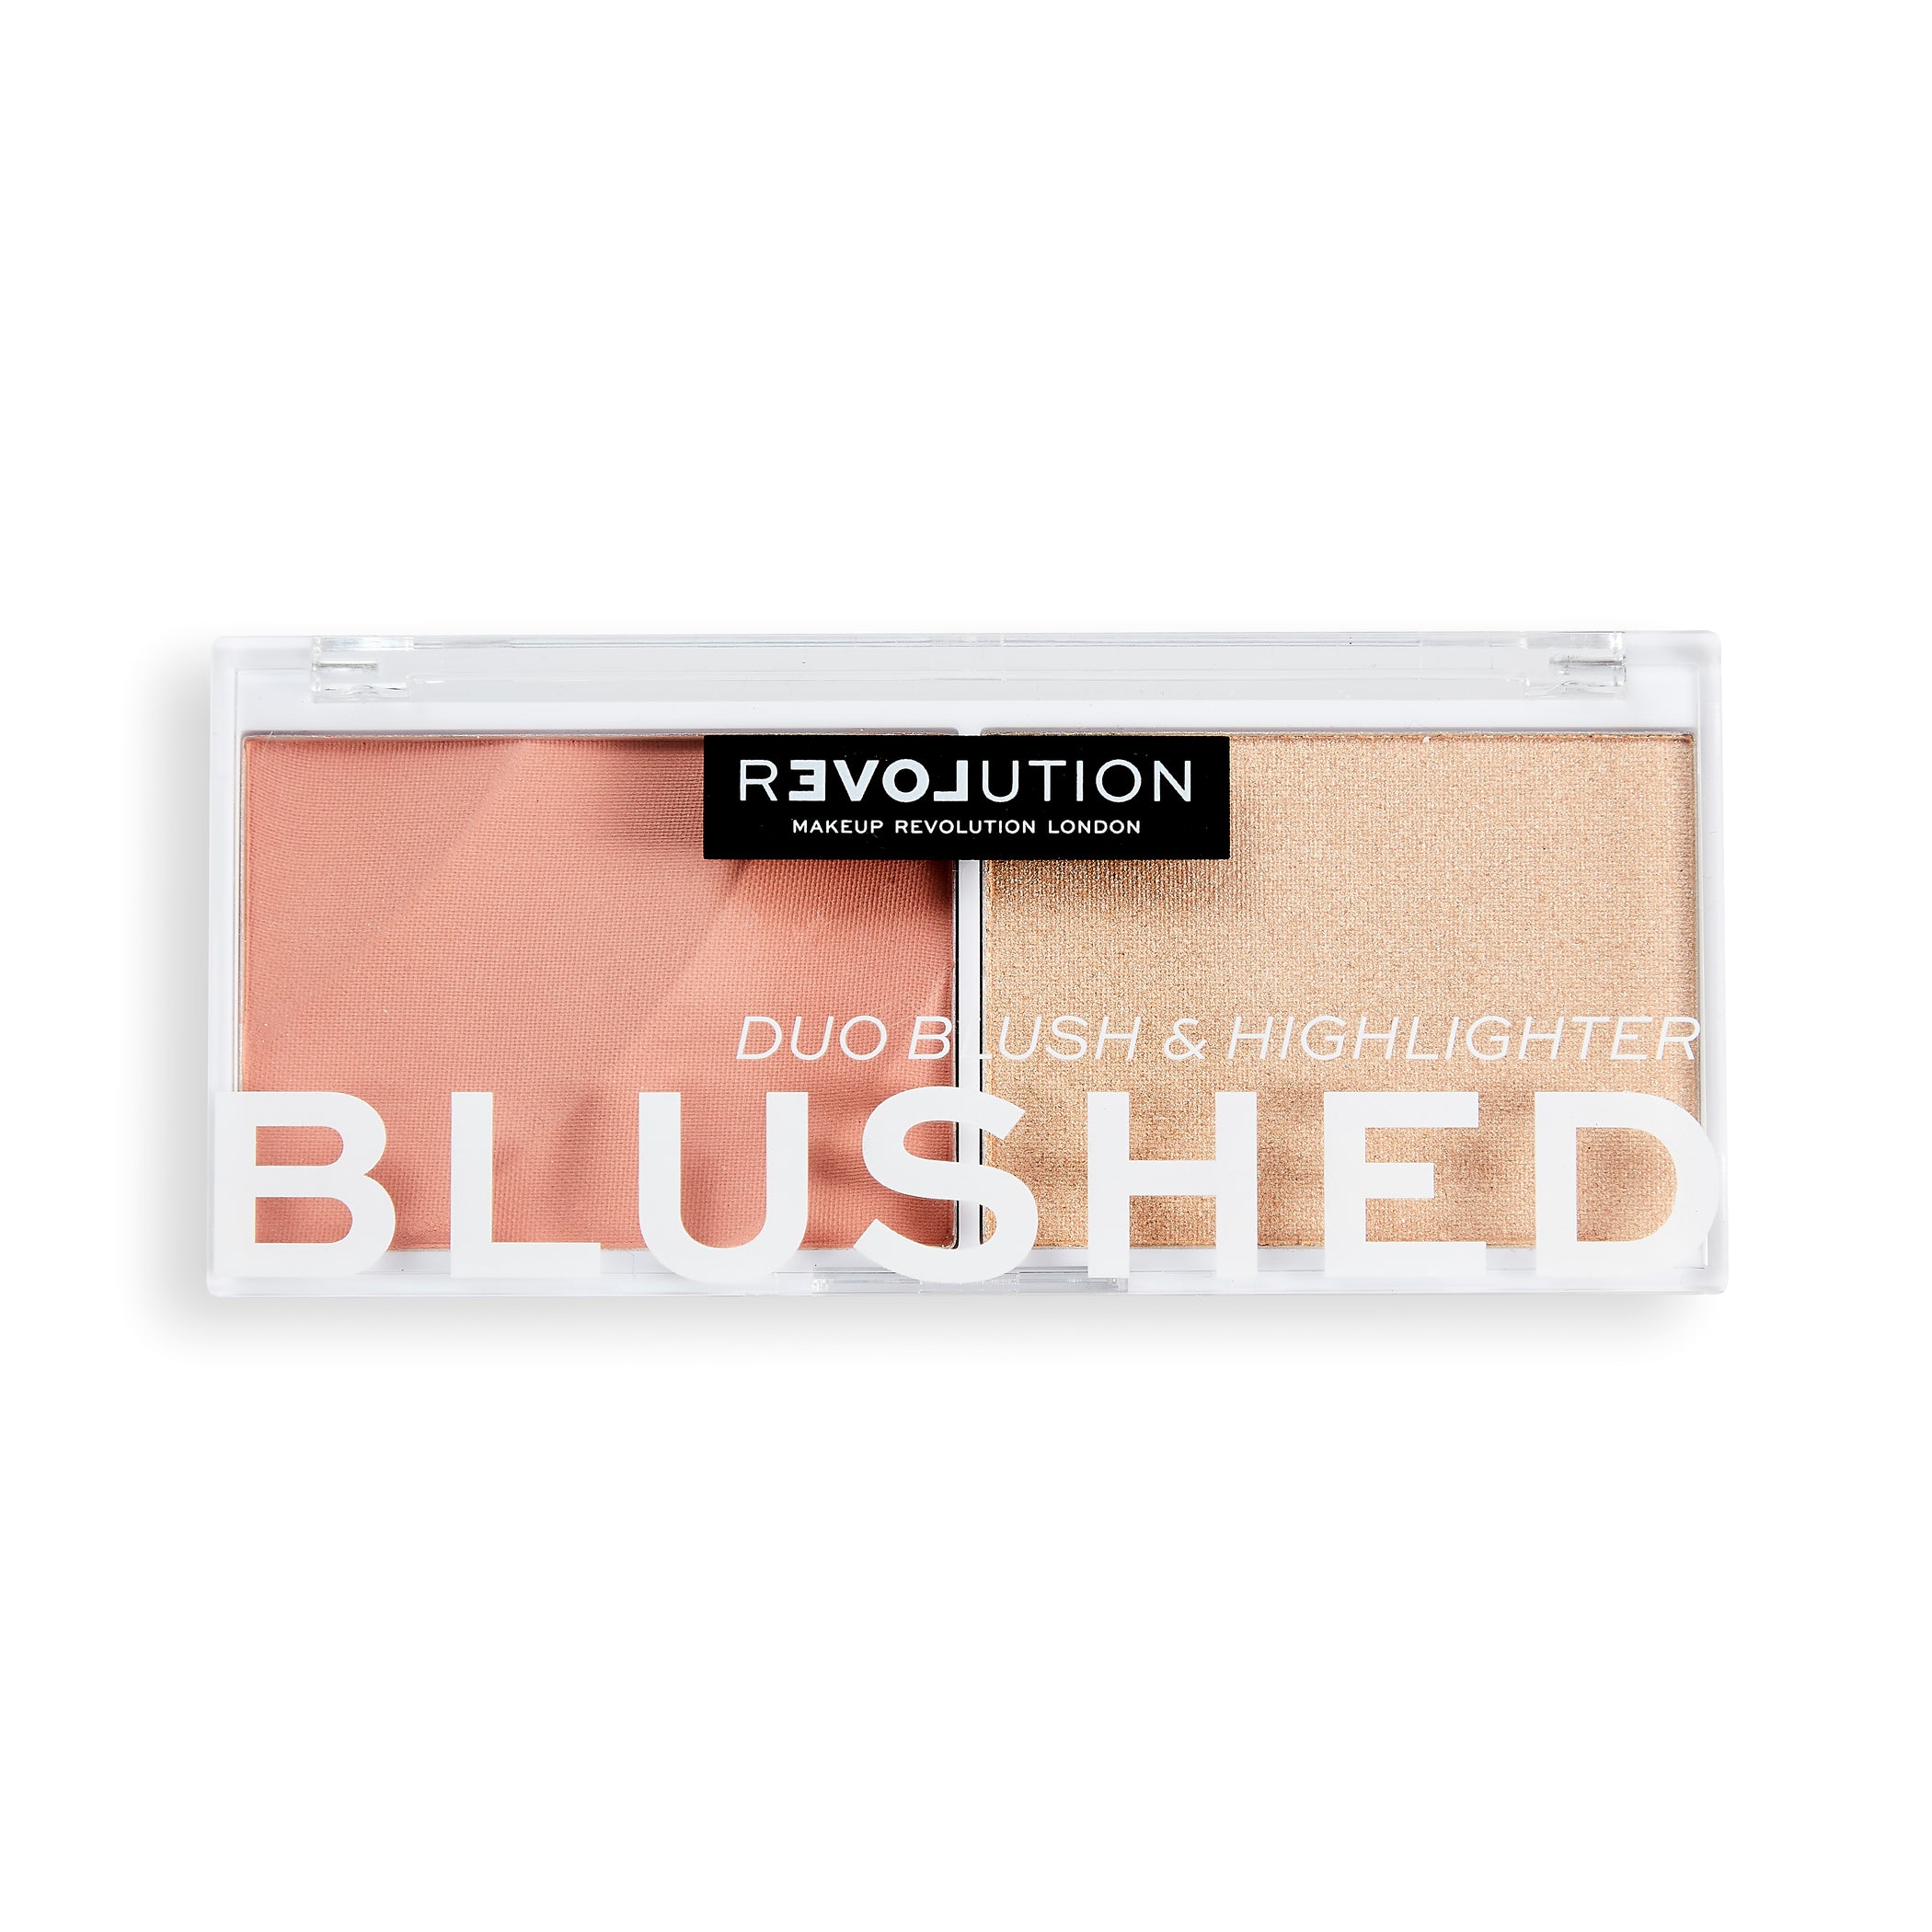 Relove By Revolution Colour Play Blushed Duo Sweet